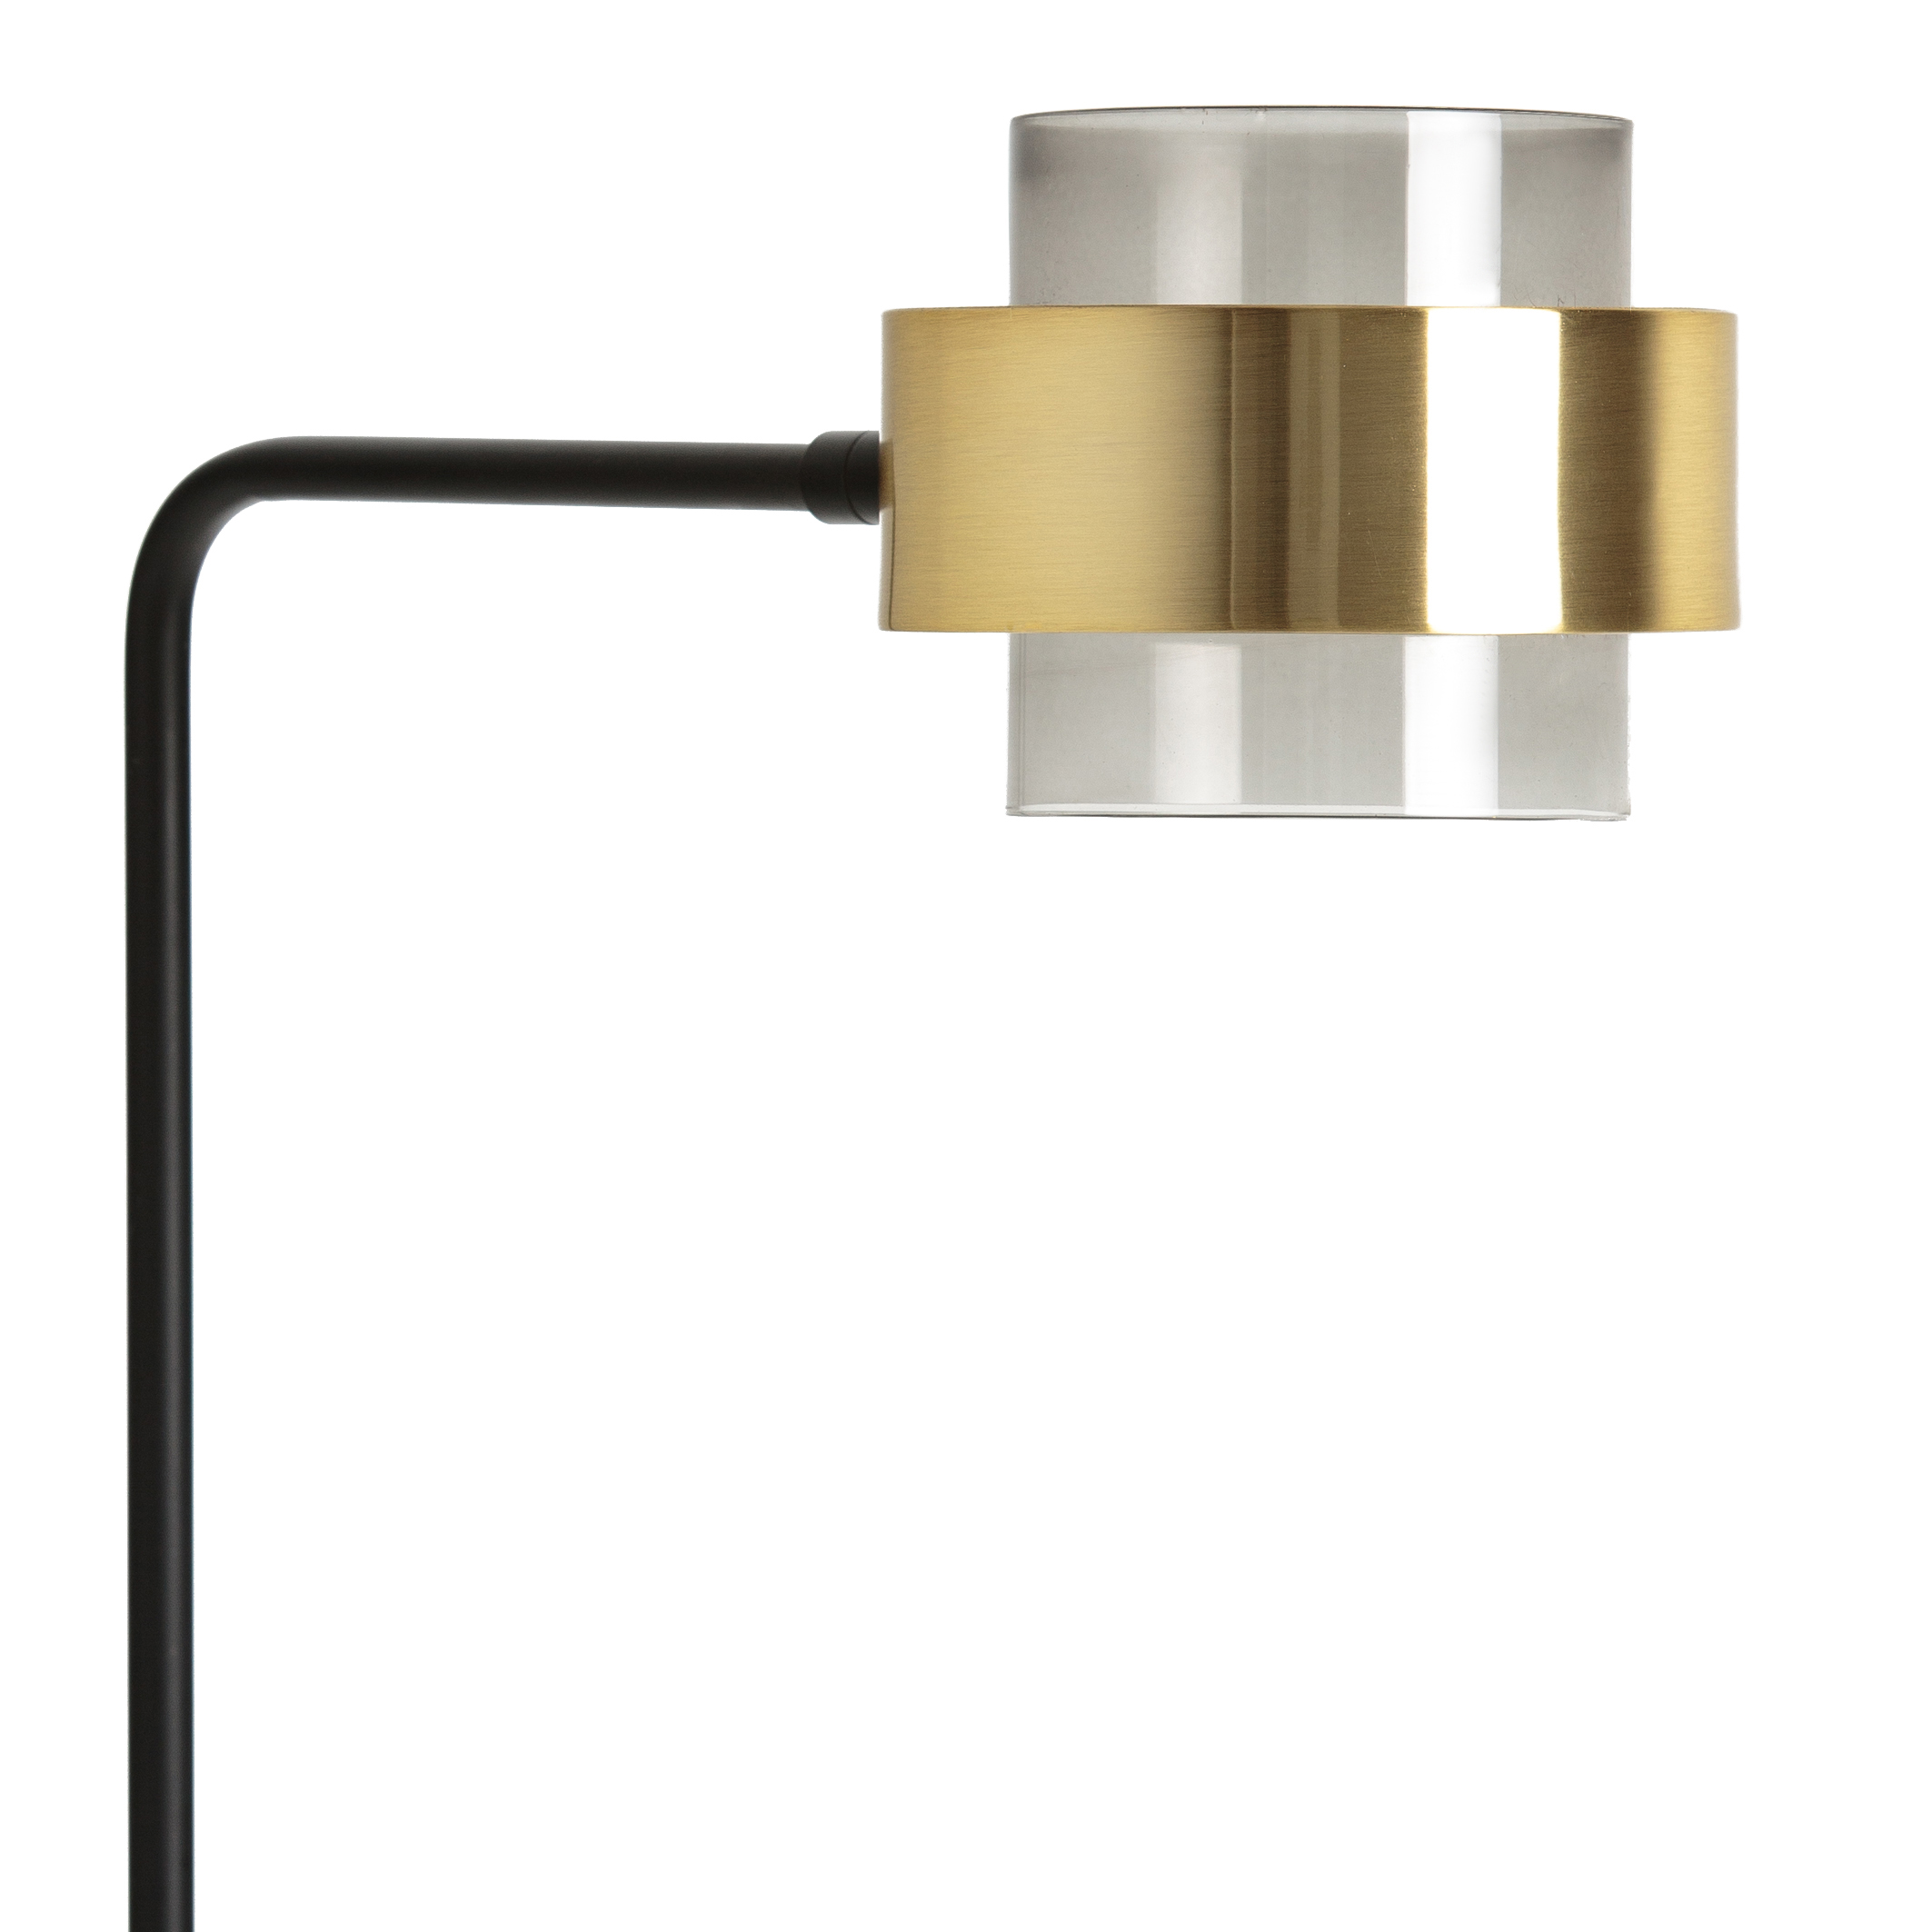 Redoute adjustable with & lamp Interieurs floor black/brass metal reading arms glass La La | Botello Redoute